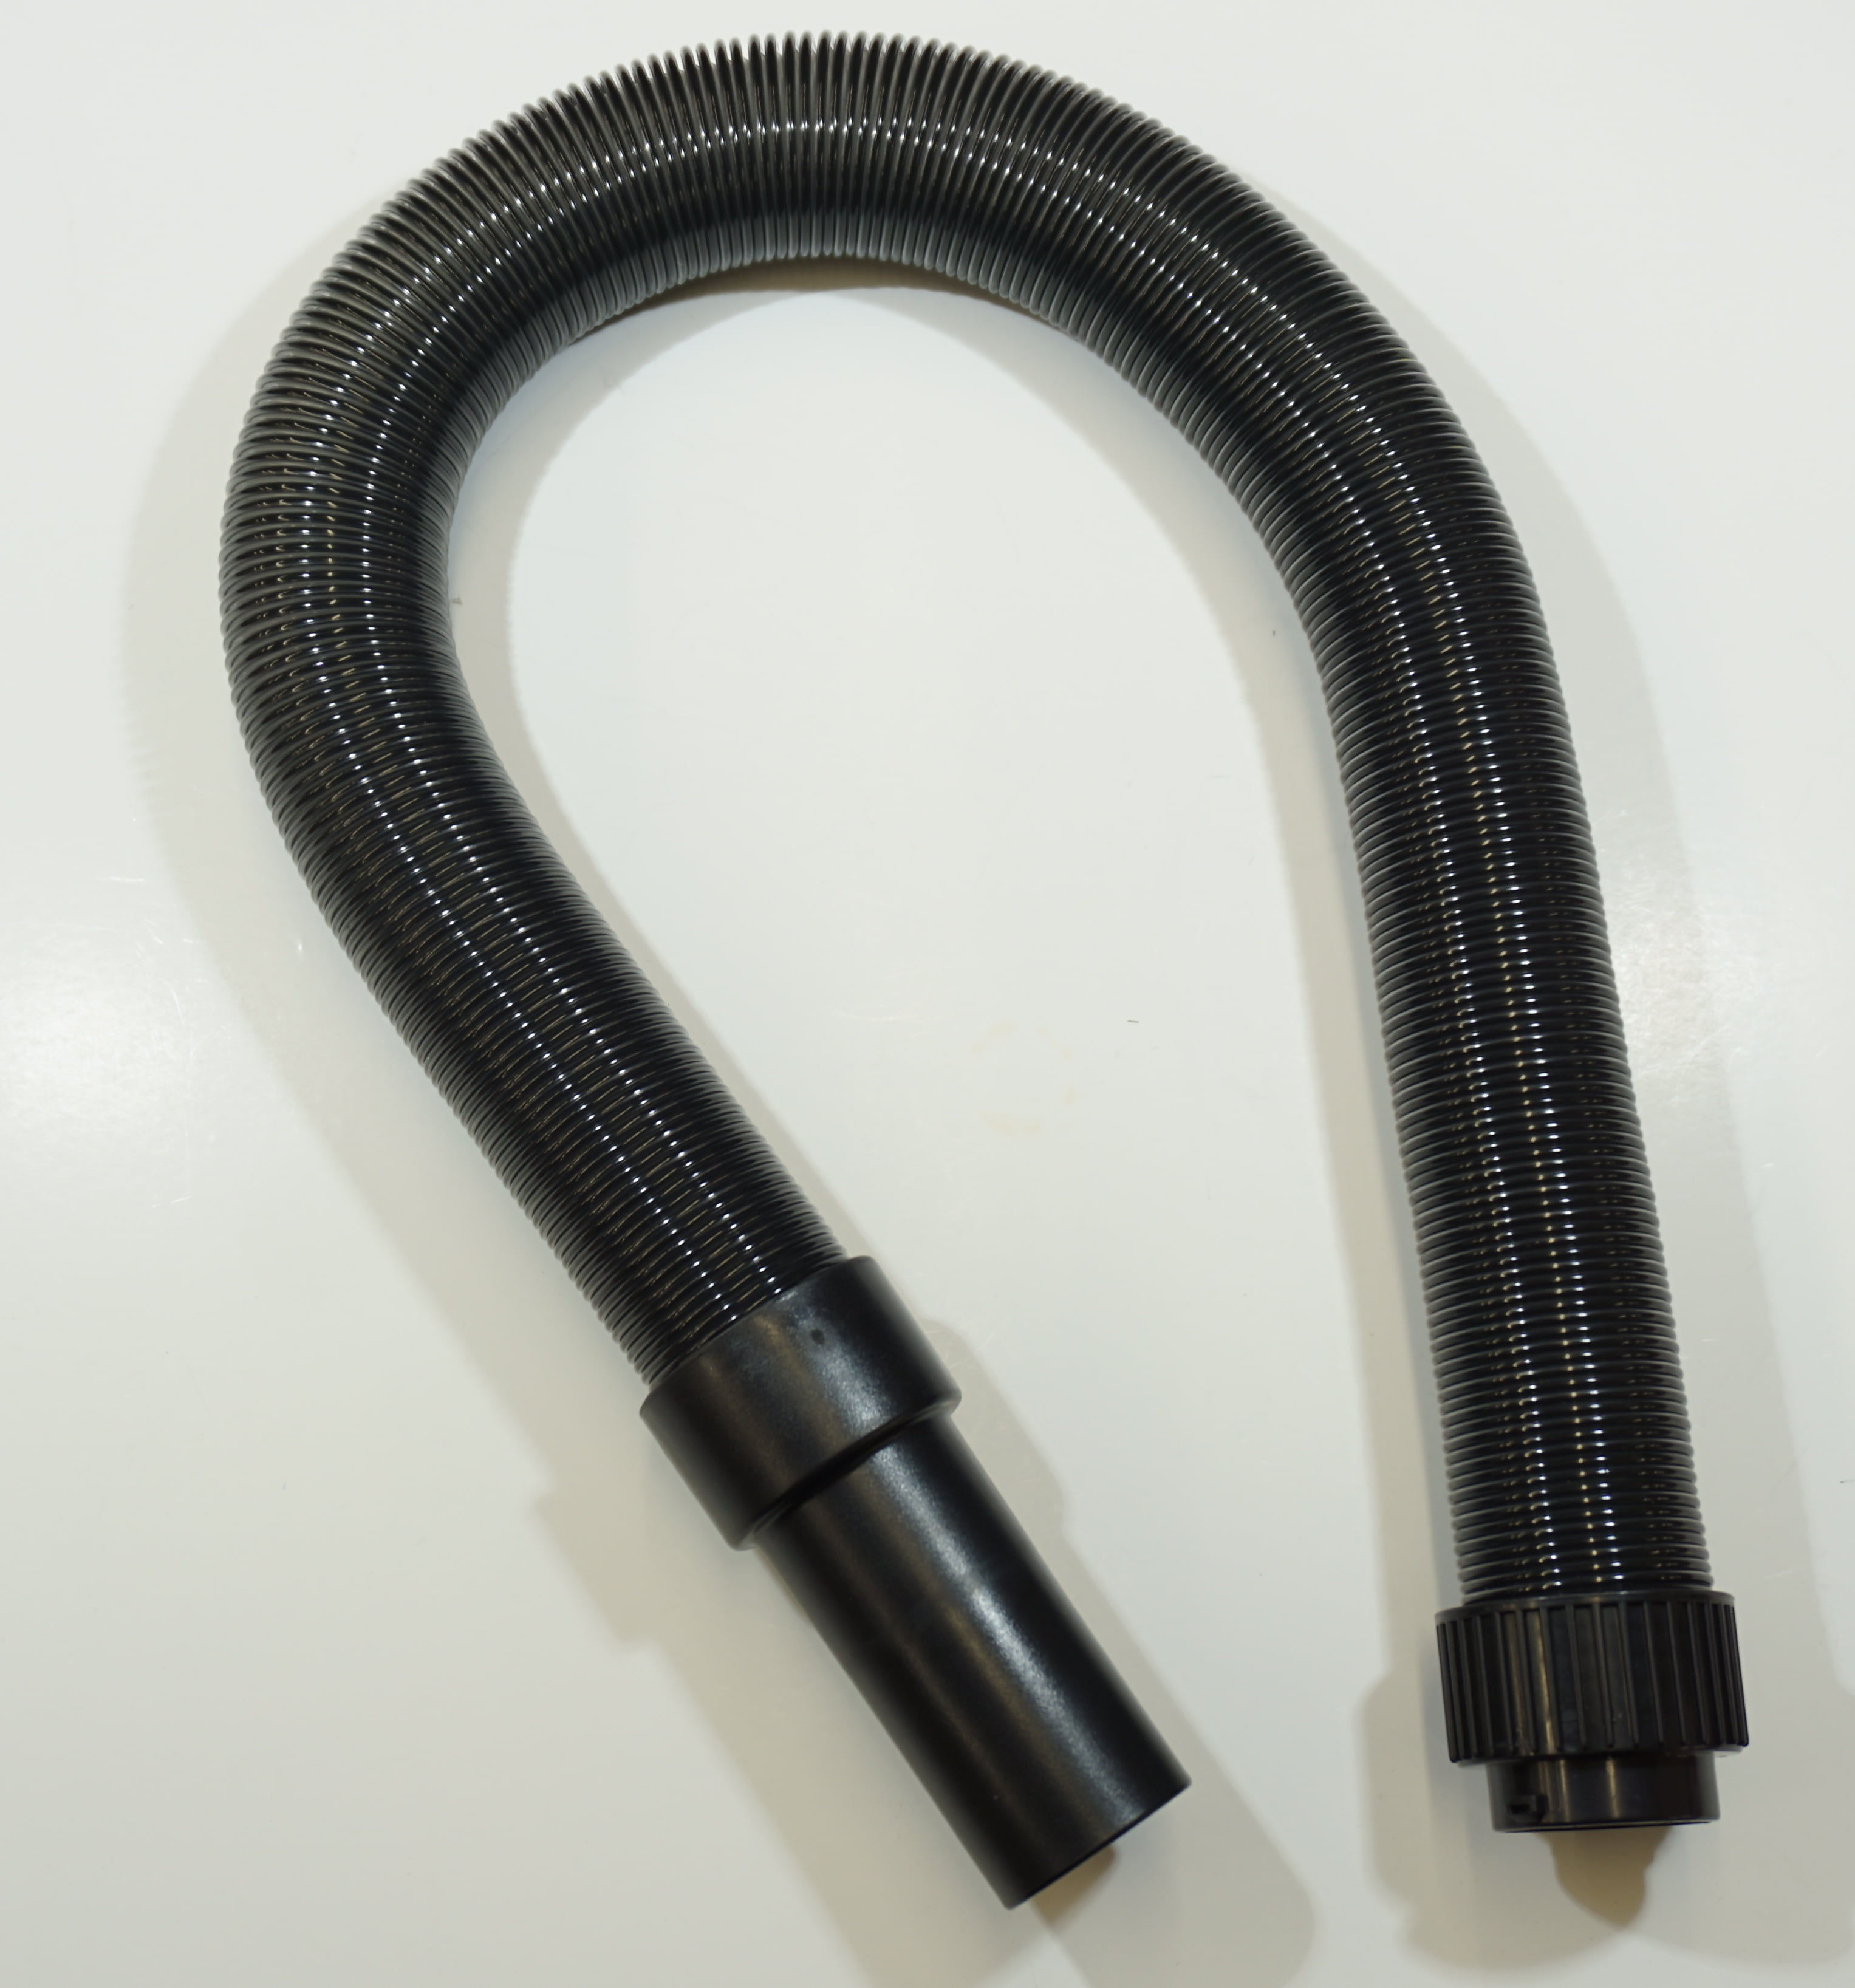 Generic BISSELL Vacuum Cleaner Hose 2031359 for sale online 